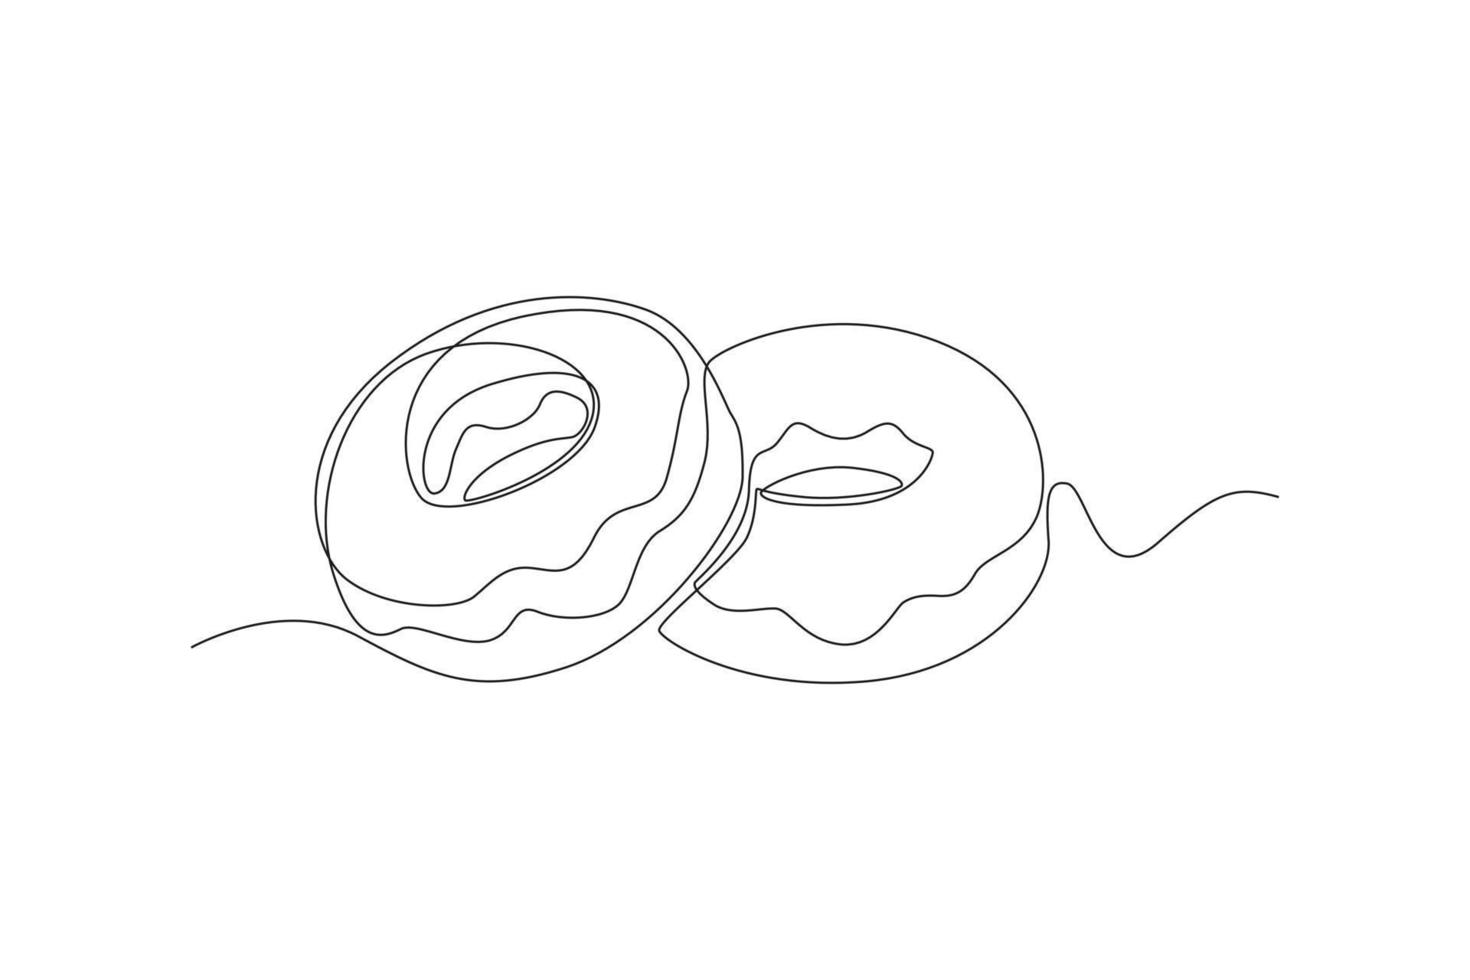 Single one line drawing fresh donuts. World food day concept. Continuous line draw design graphic vector illustration.